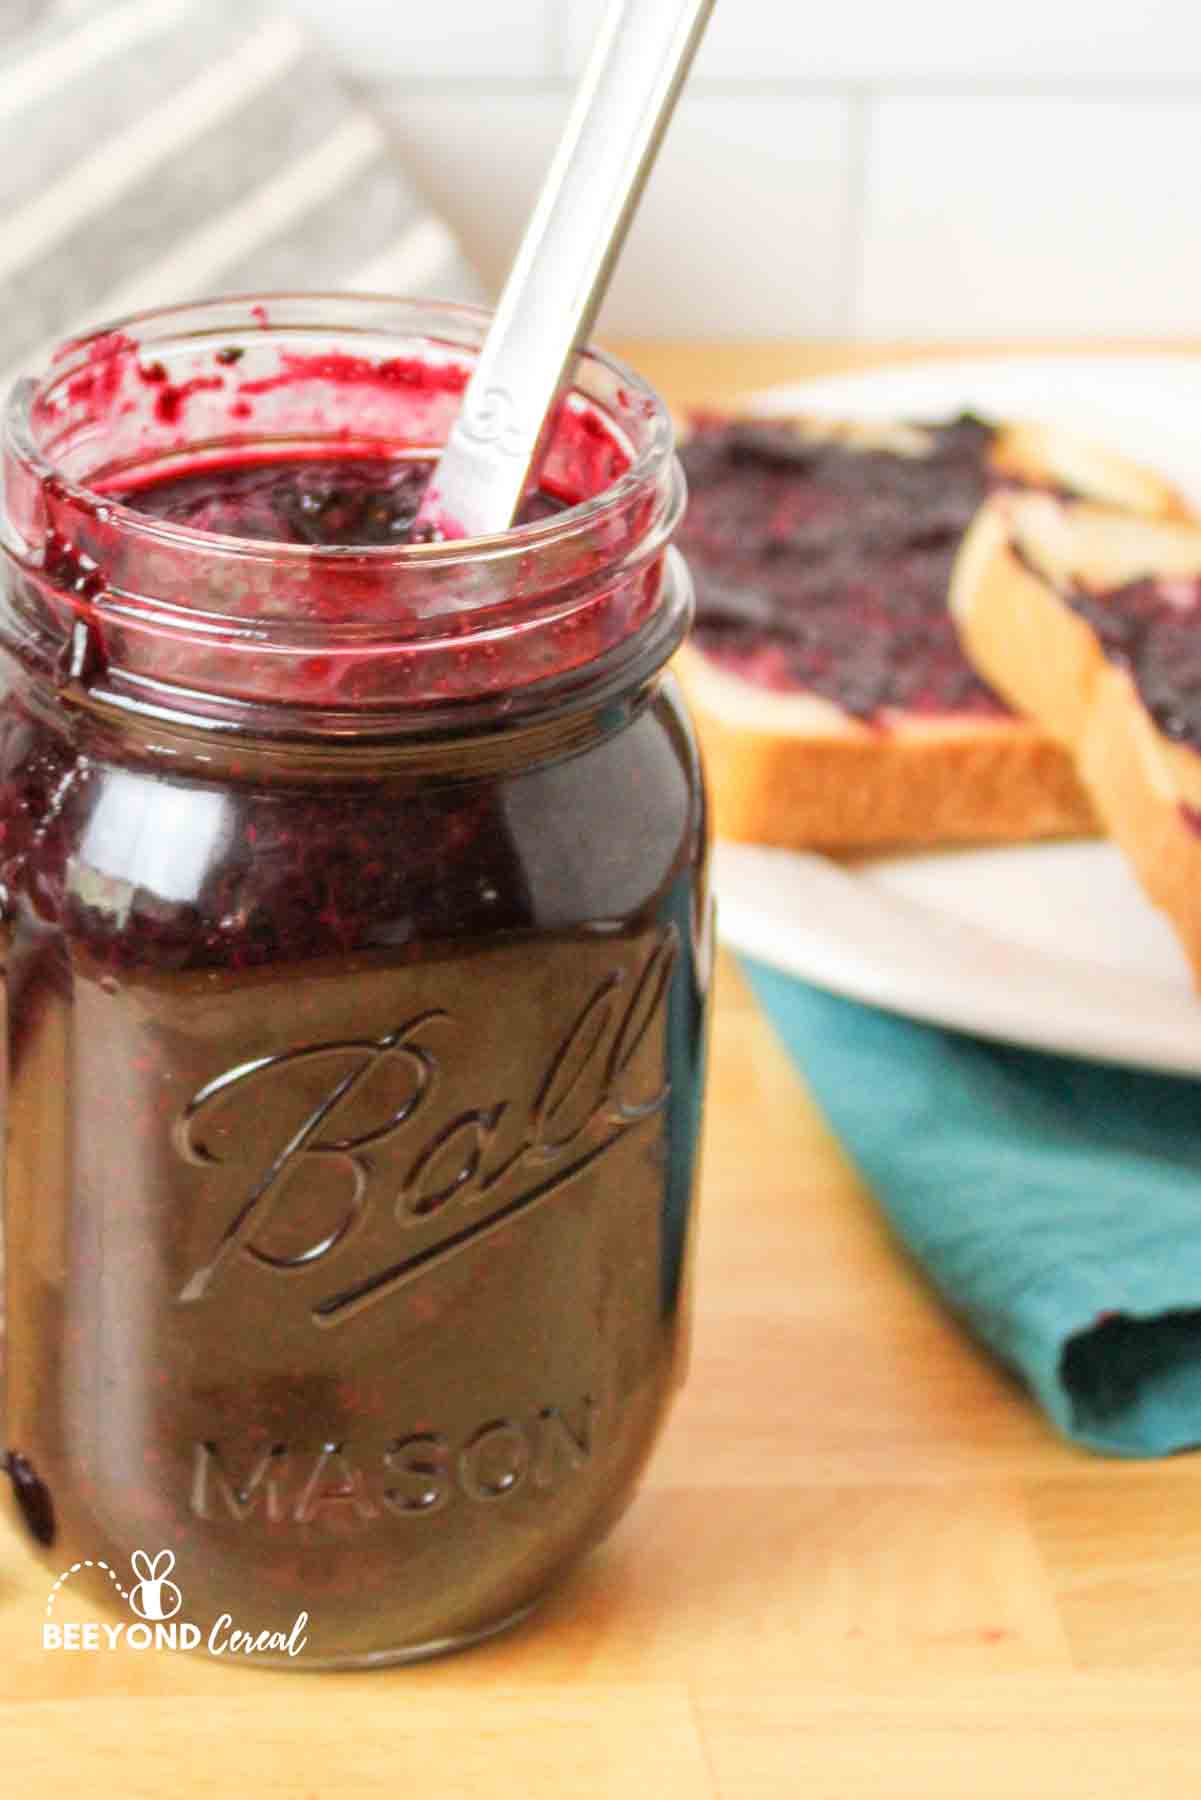 a side view of a jar filled with sugar free blueberry jam